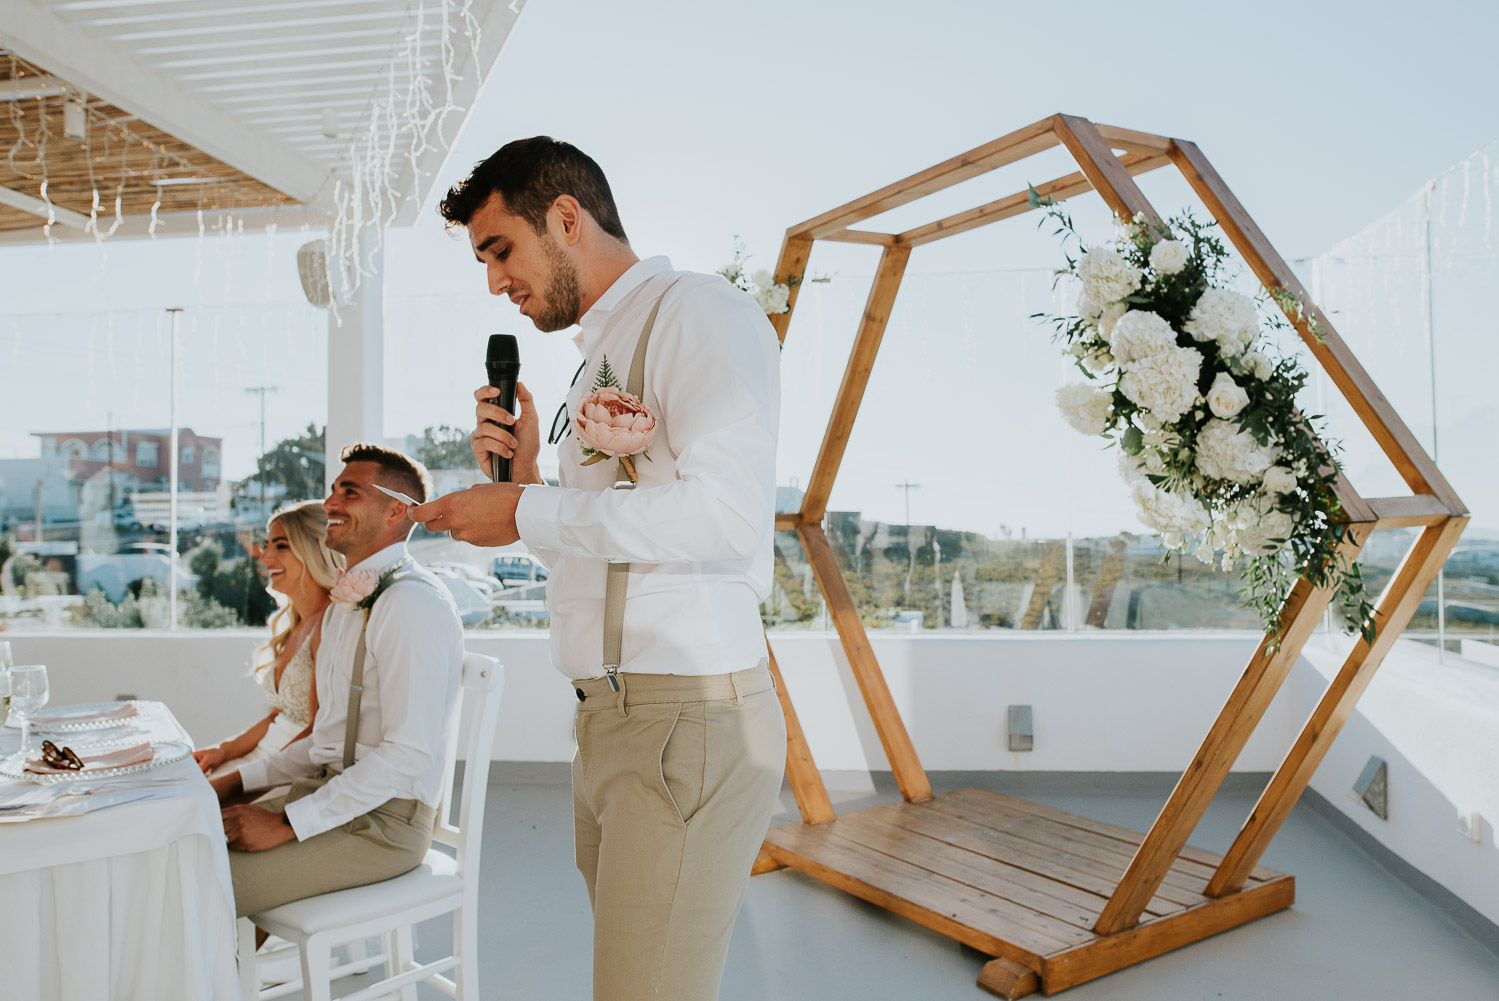 Wedding photographer Santorini: bride and groom laugh as they listen to the best man's speech by Ben and Vesna.